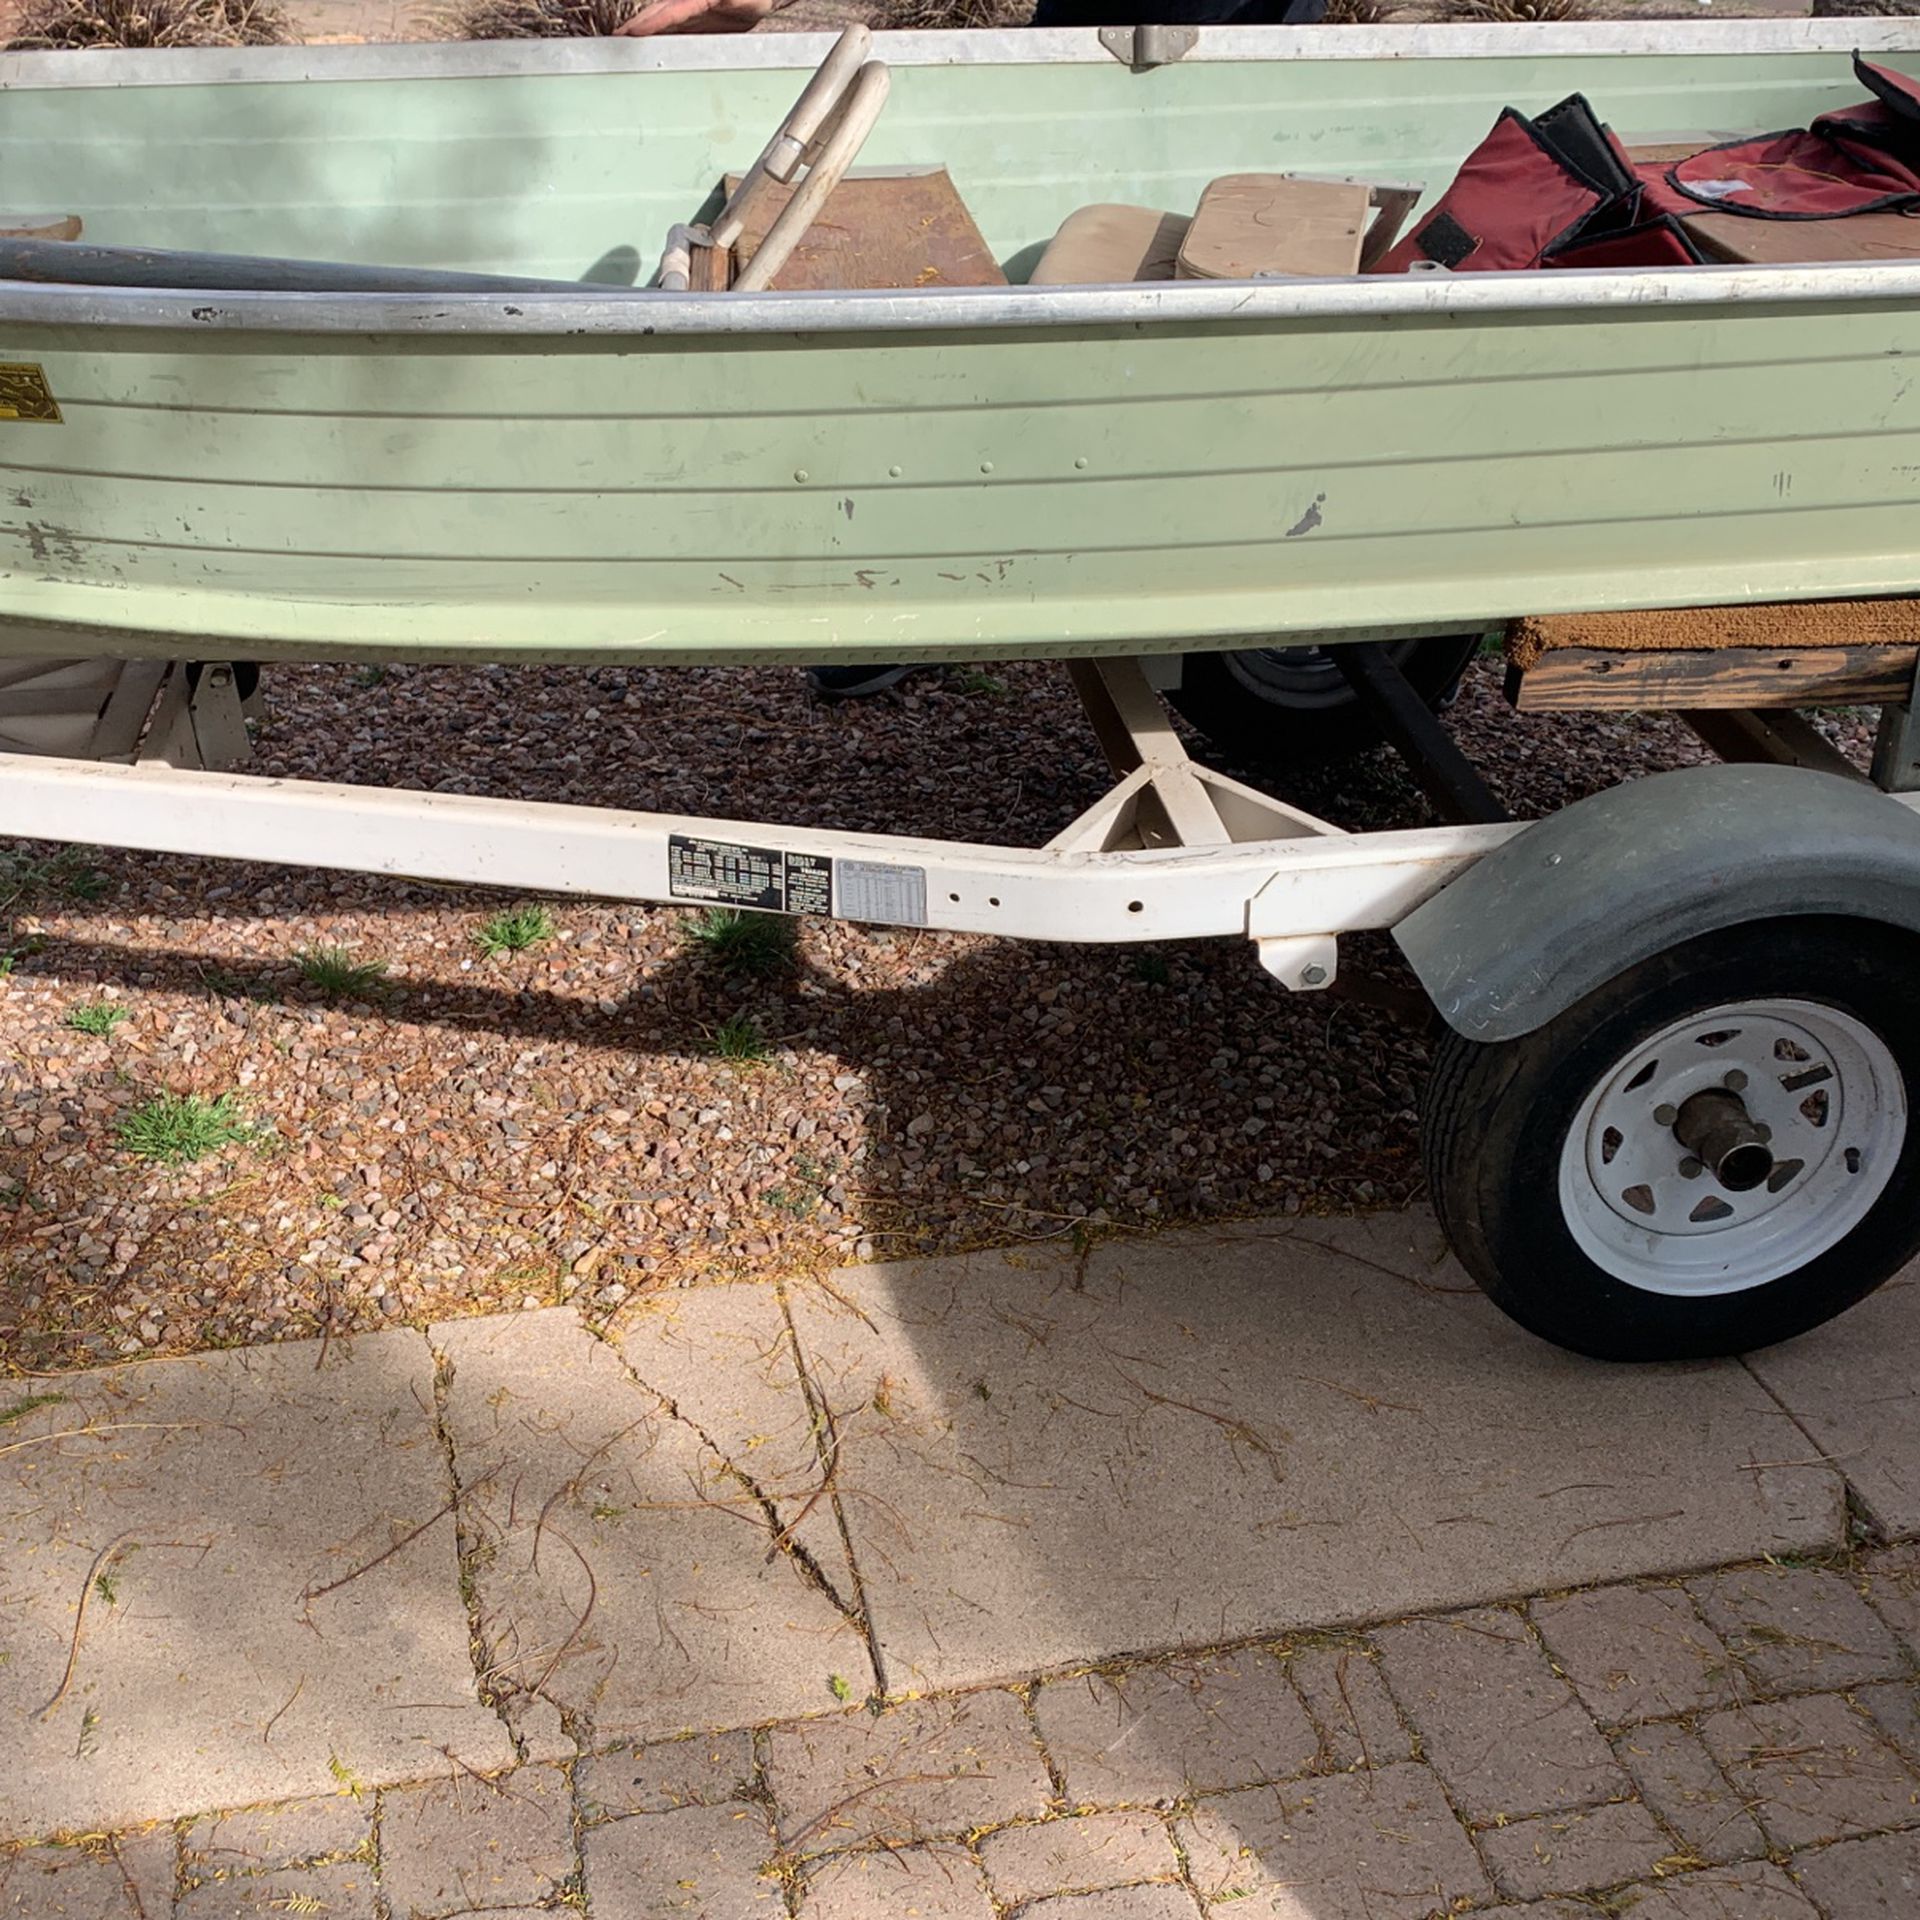 12 Foot Aluminum Starcraft Boat With Trailer And Outboard